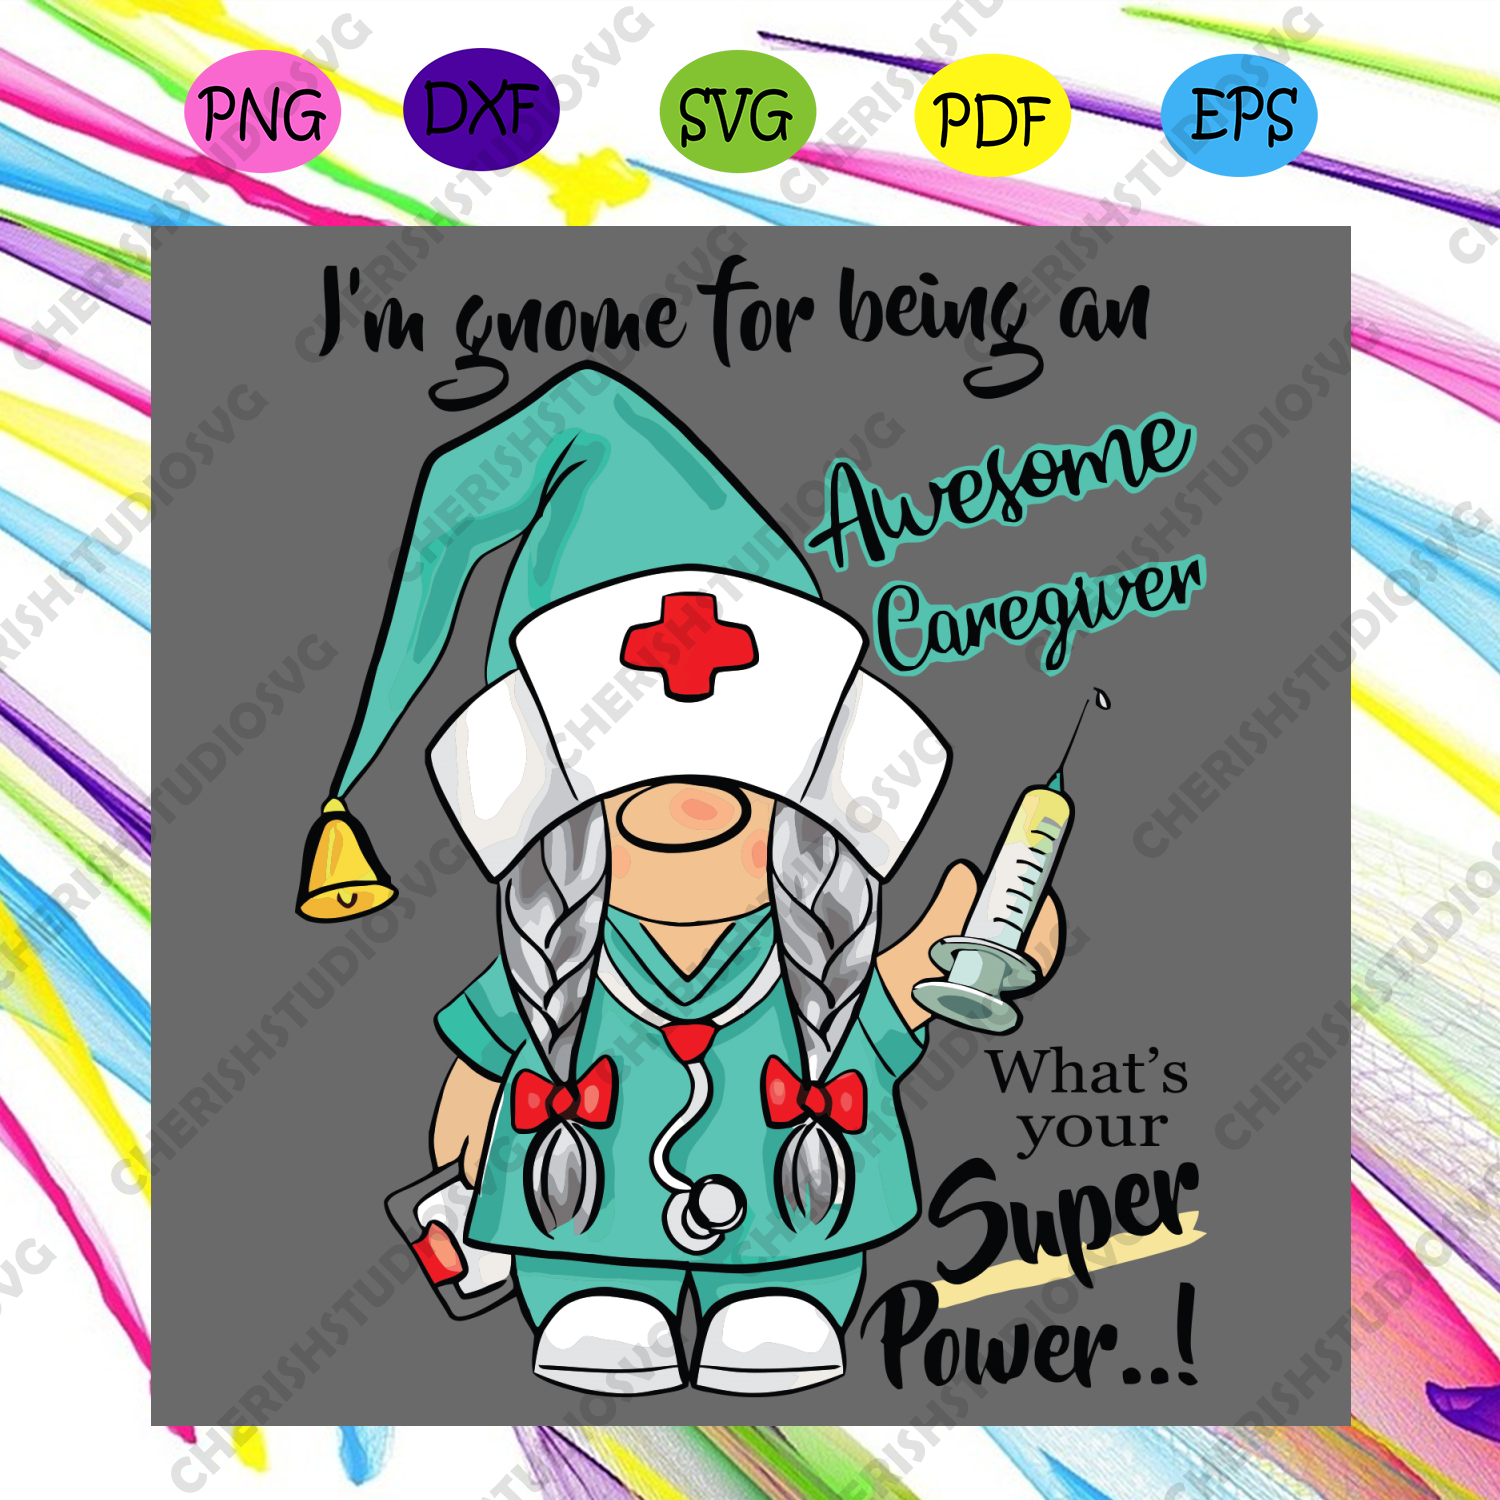 I Am Gnome For Being An Awesome Caregiver What Is Your Superpower Svg Cherishsvgstudio